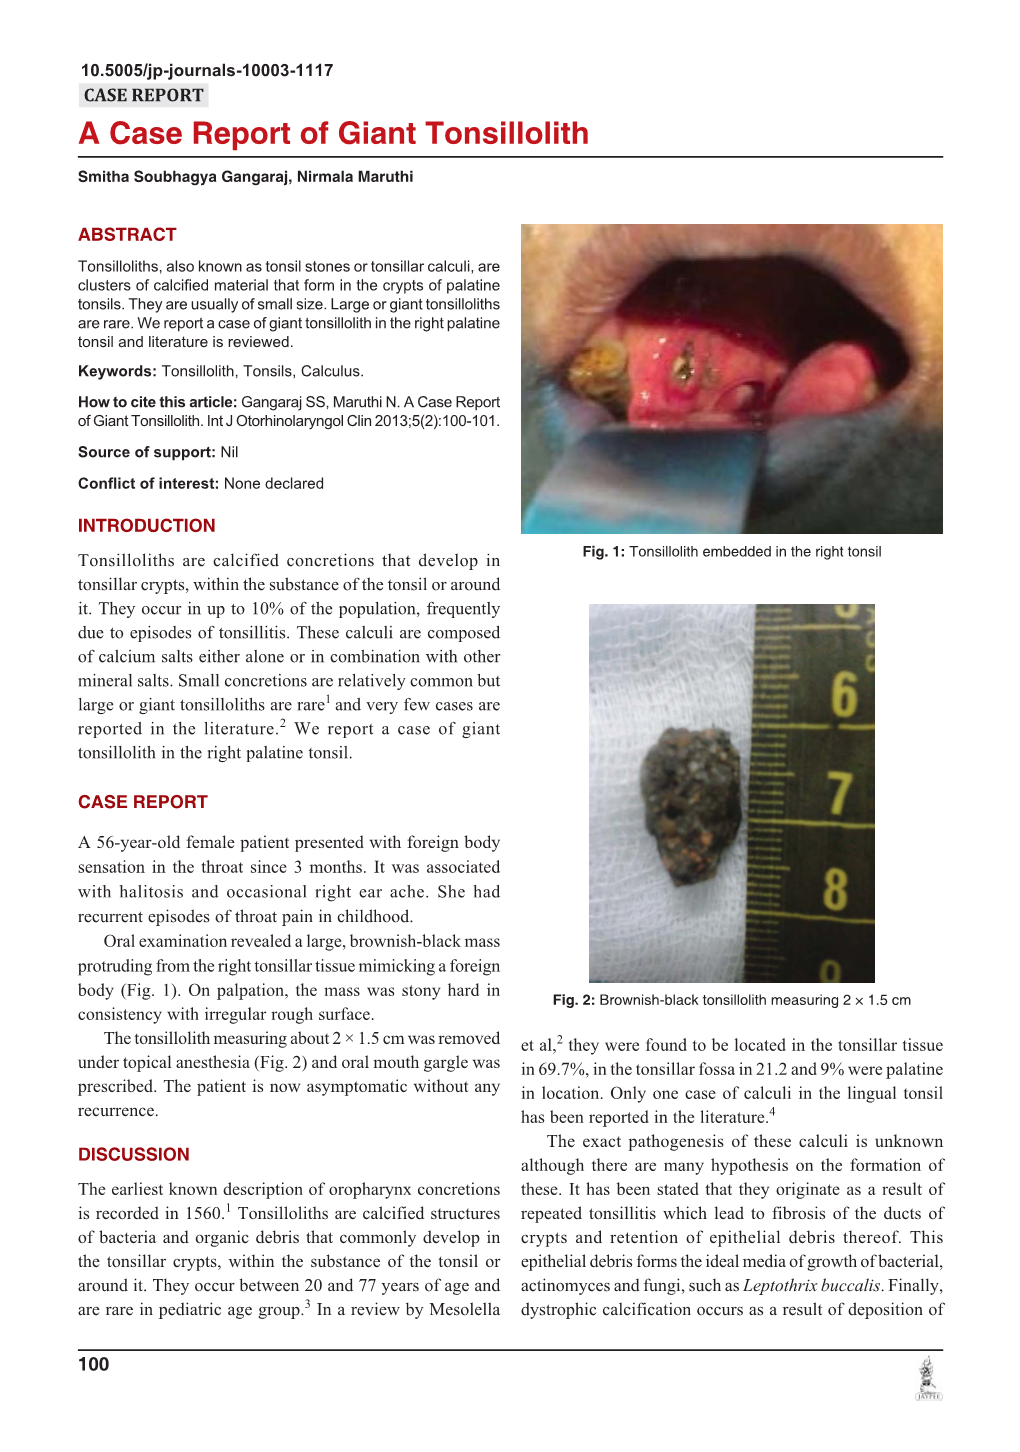 A Case Report of Giant Tonsillolith